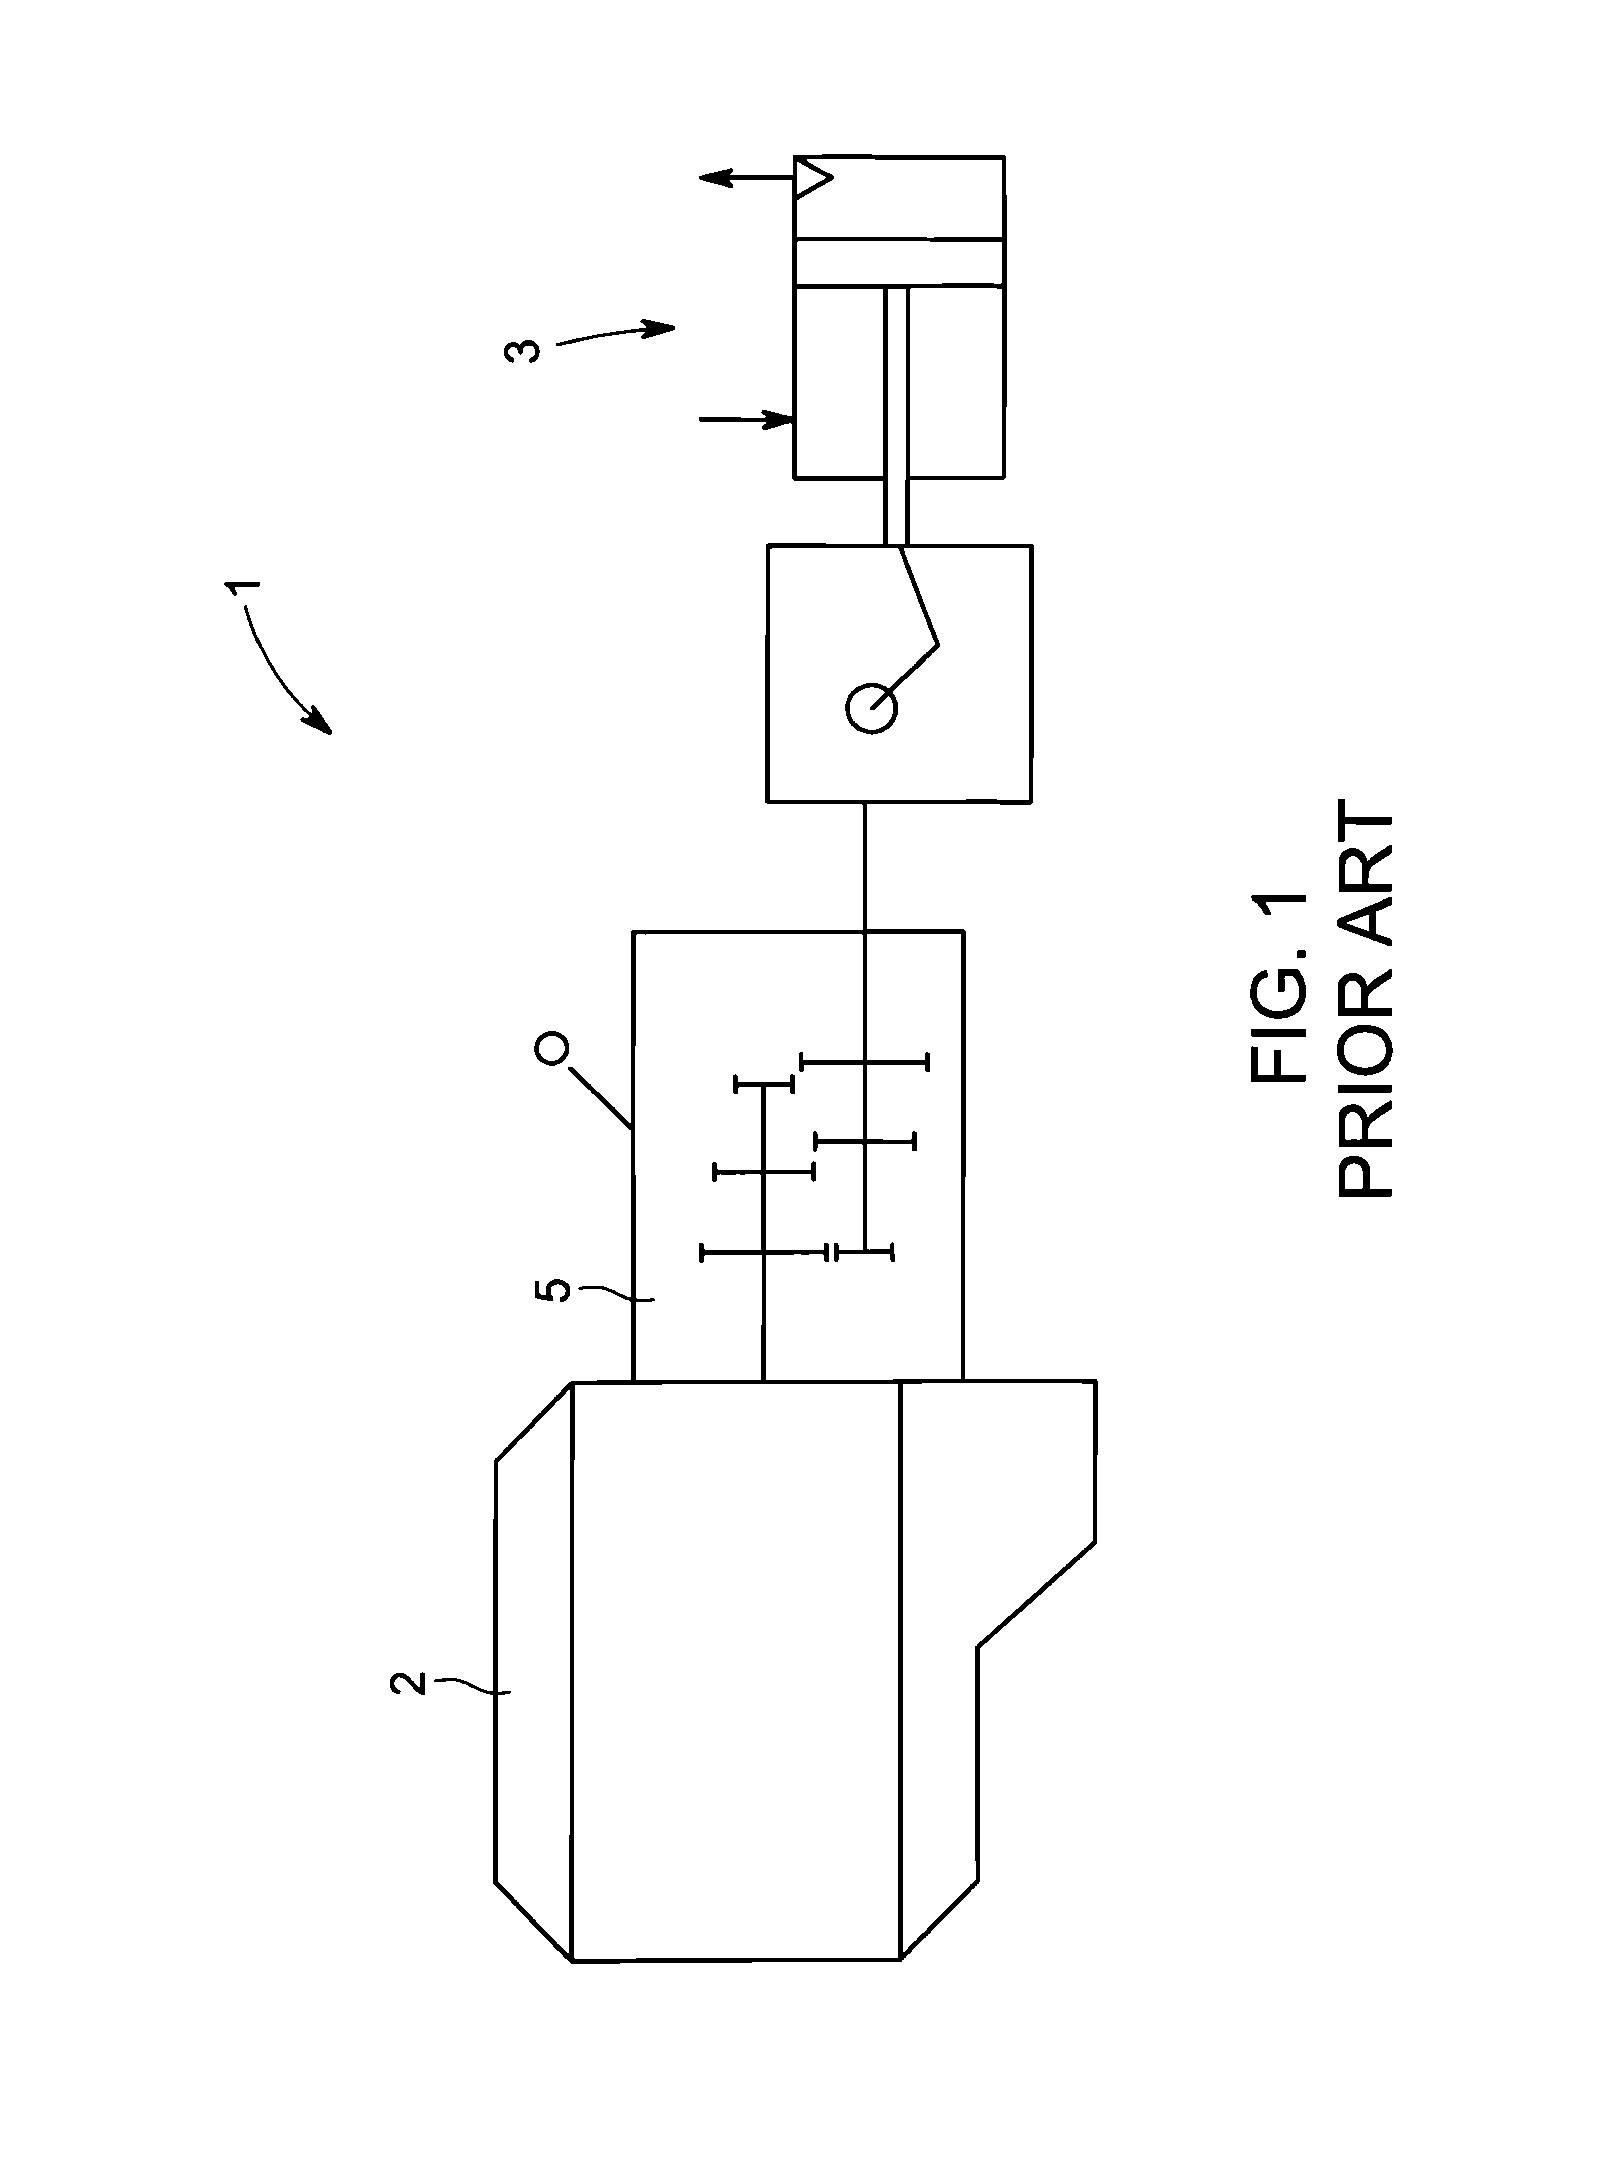 System and method for driving multiple pumps electrically with a single prime mover